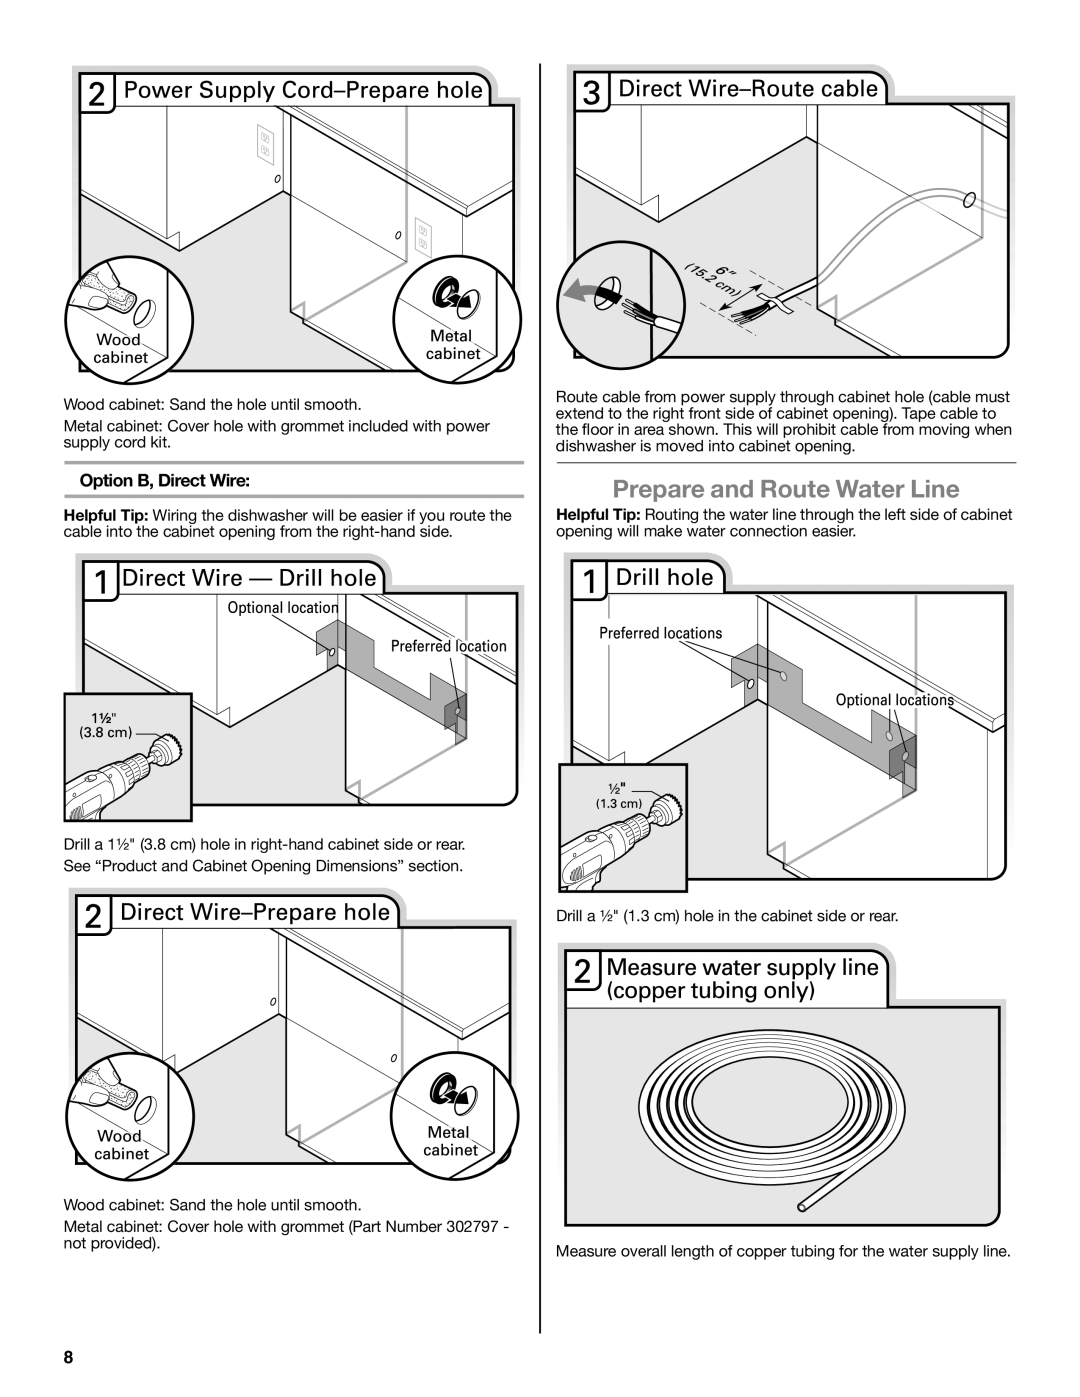 Maytag W10532762A installation instructions Prepare and Route Water Line, Option B, Direct Wire 